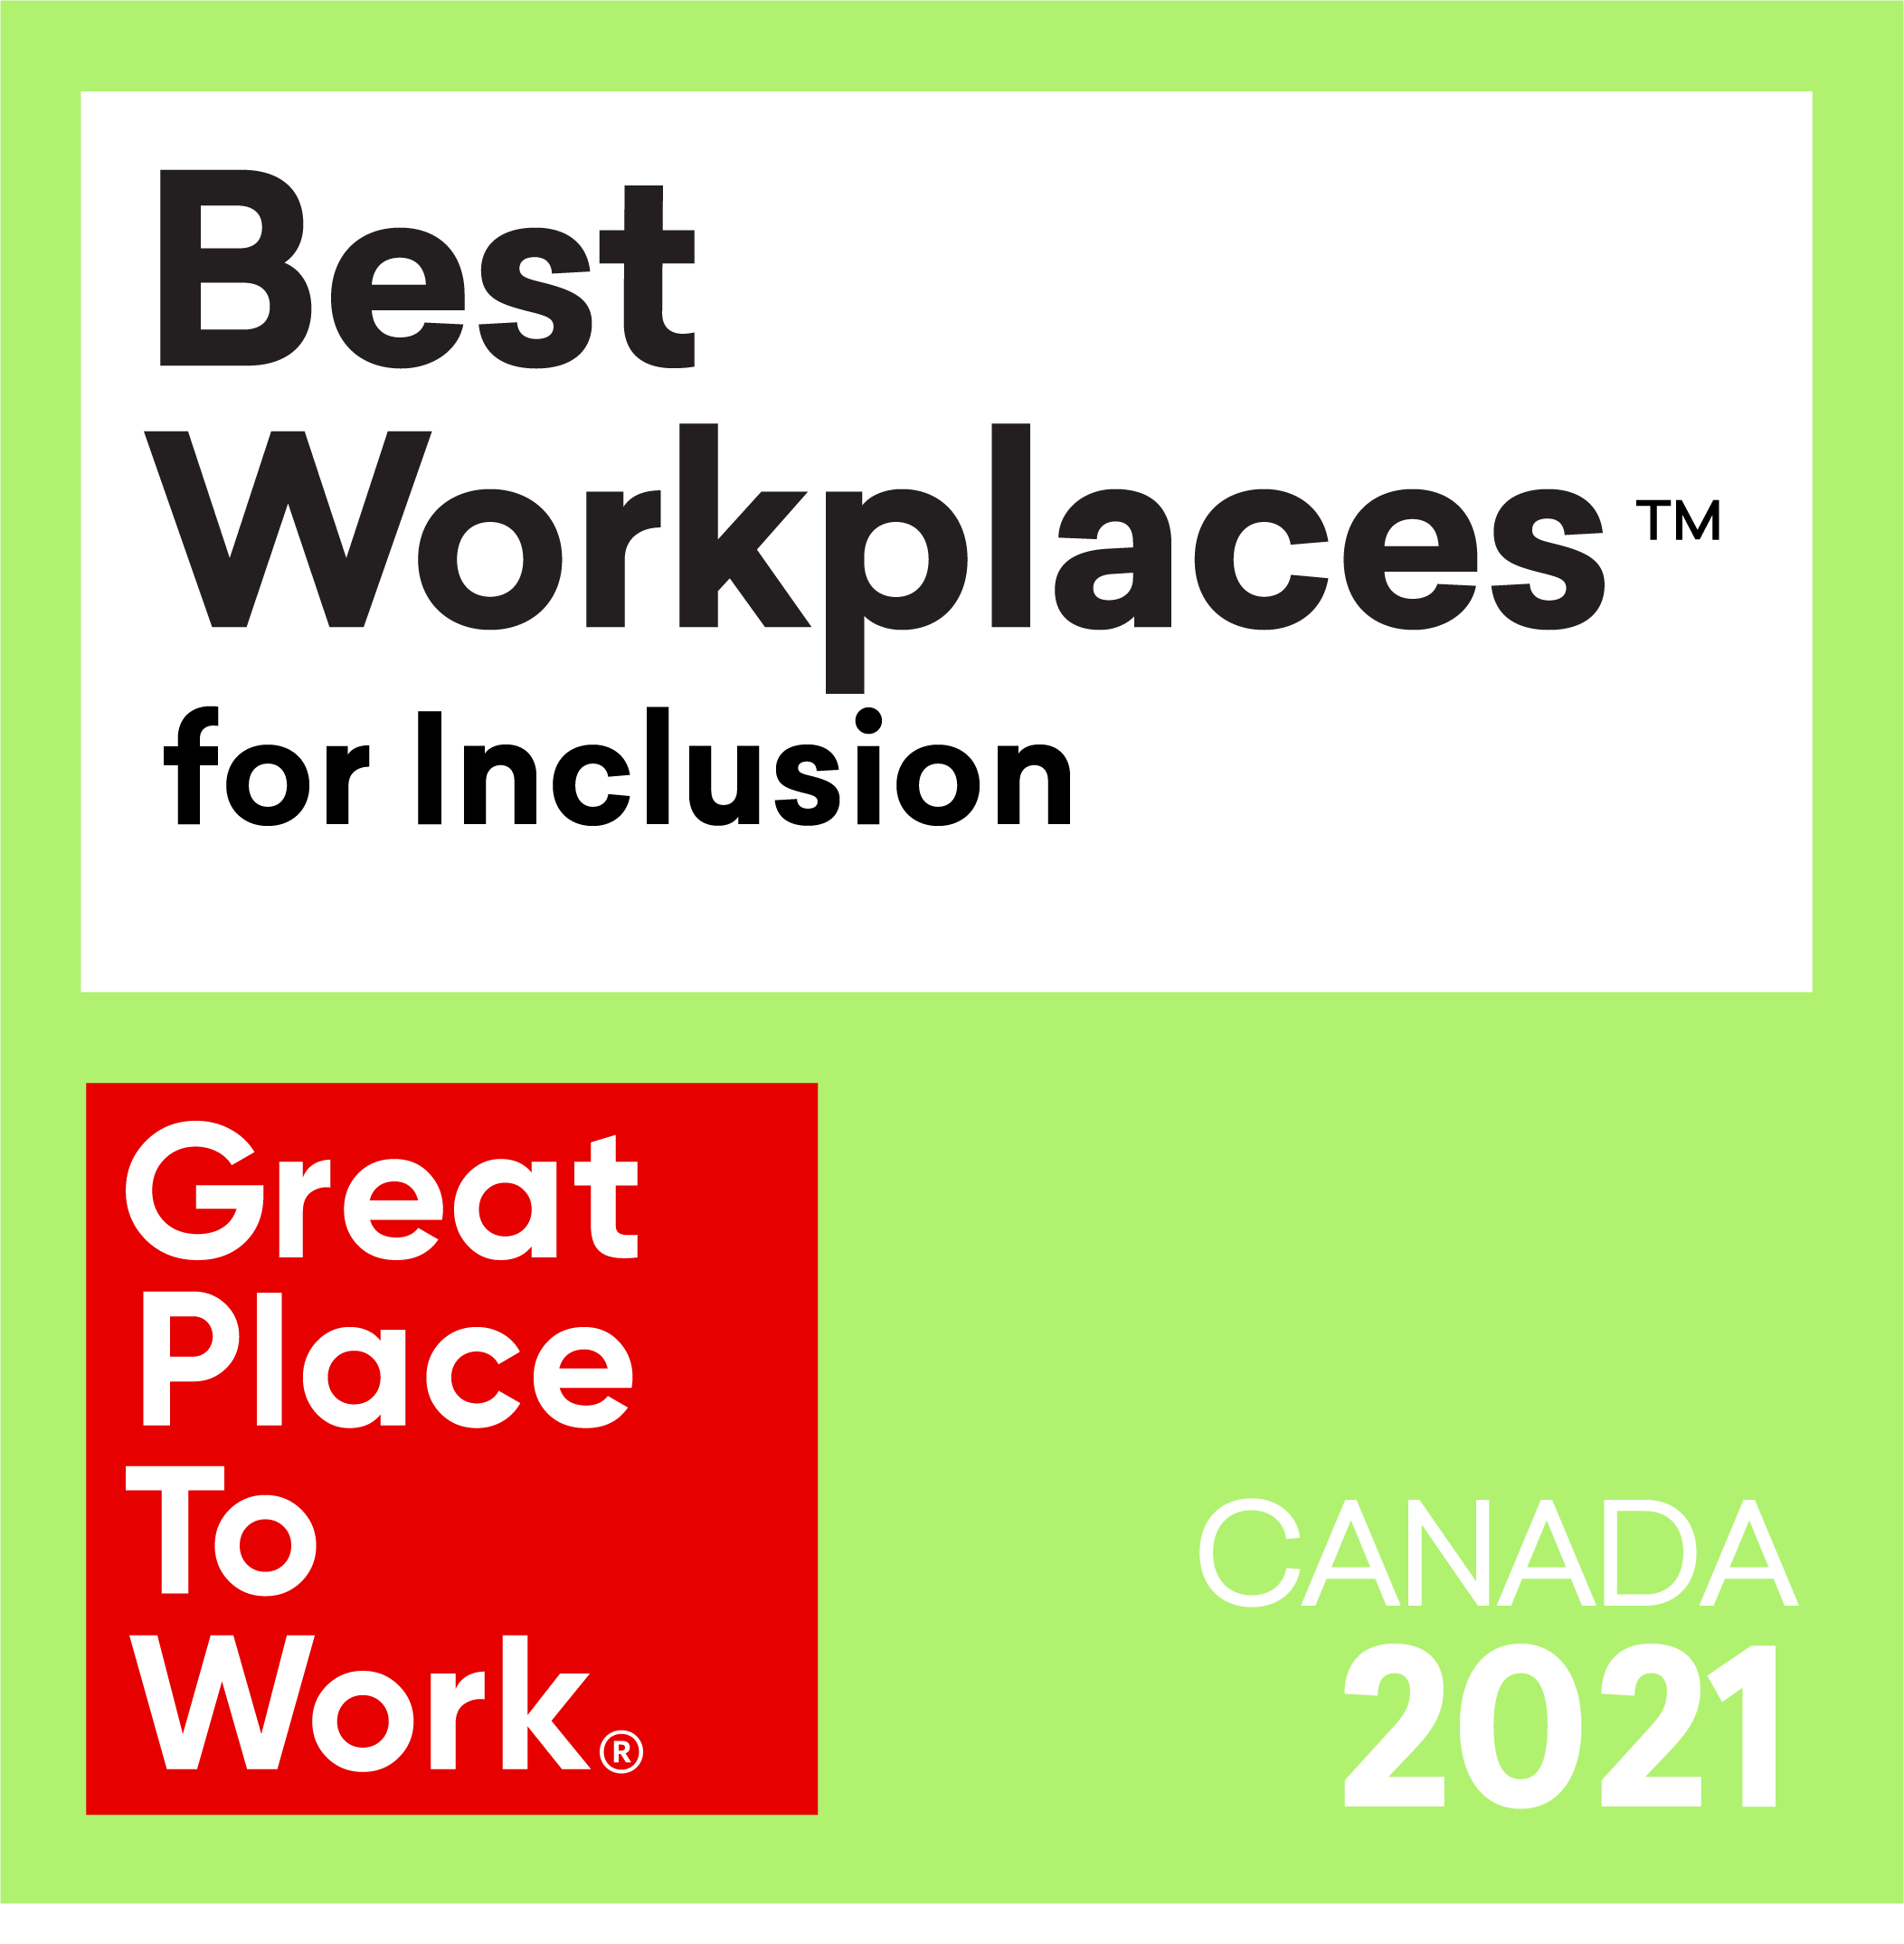 ImageX named in the Best workplaces for inclusion list